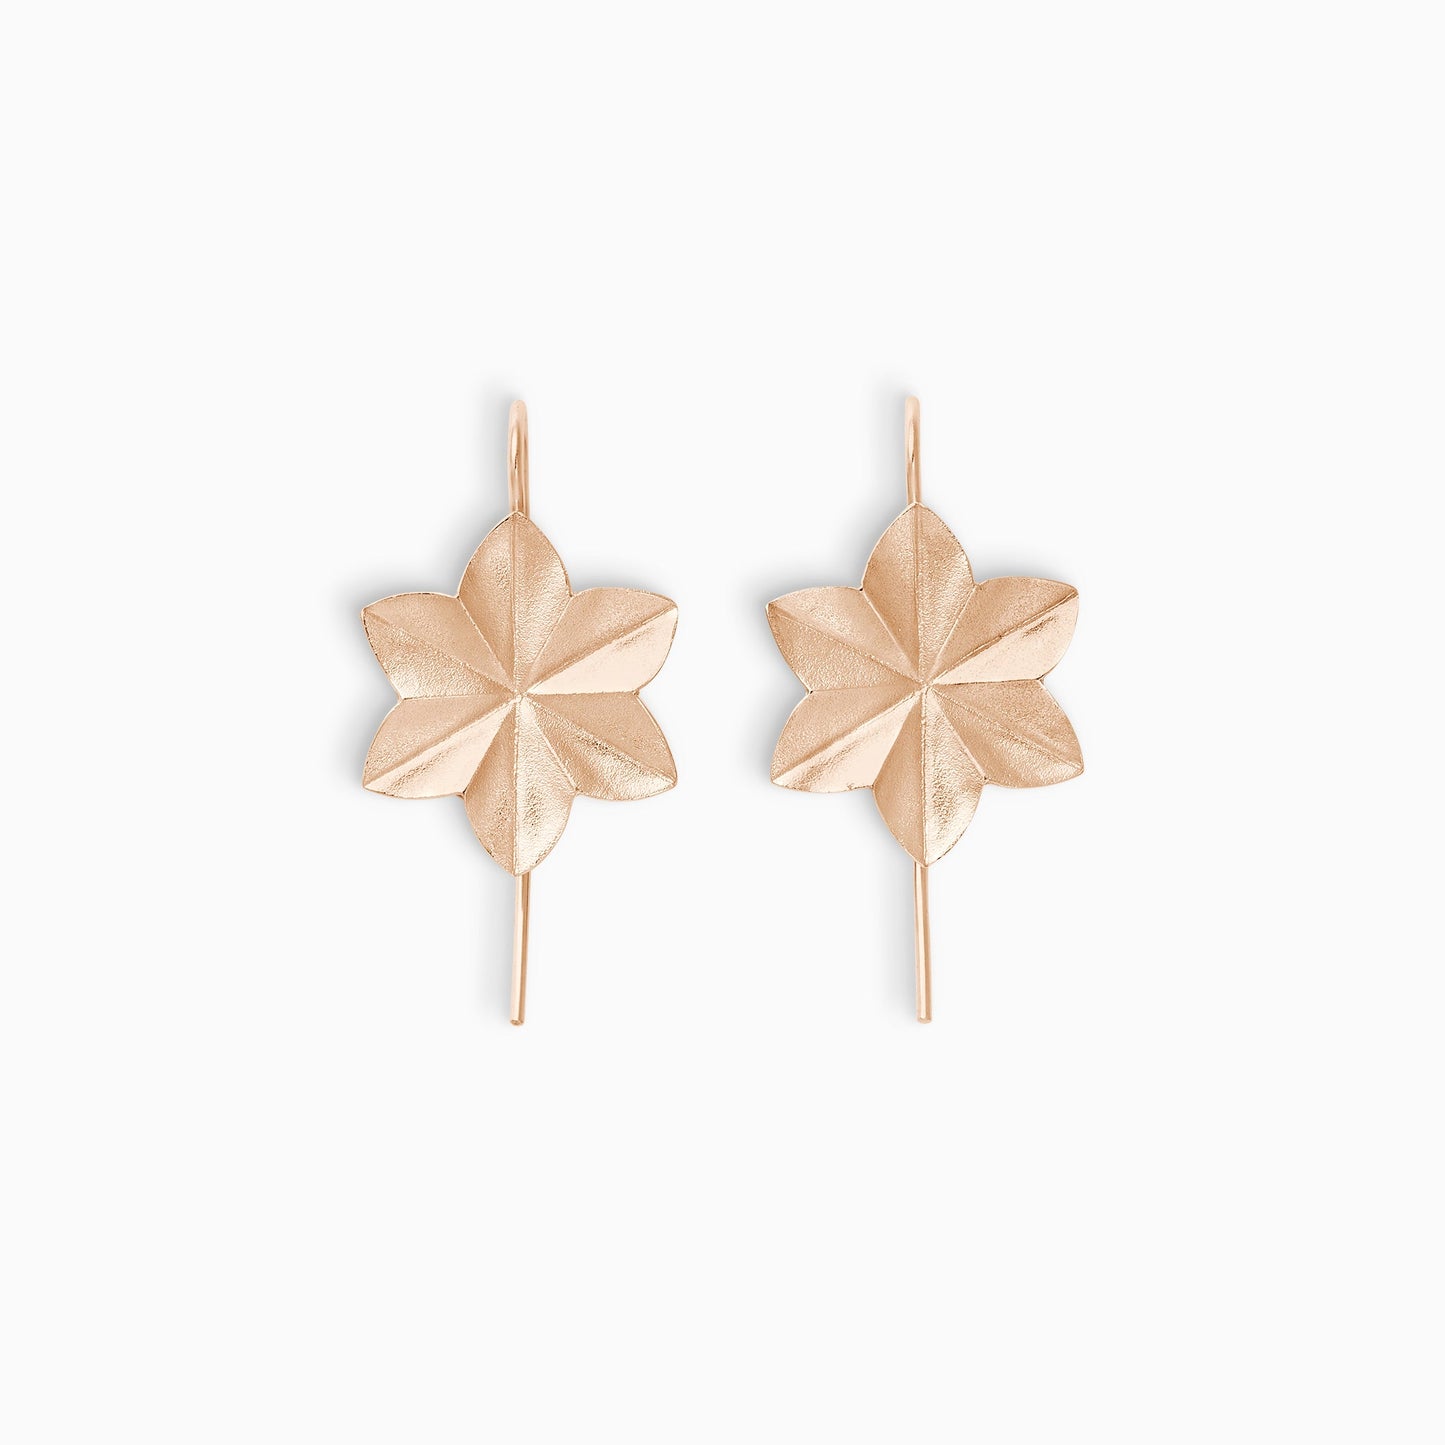 A pair of 18ct fairtrade rose gold lightly textured earrings in the shape of an origami folded 6 petal flower with a hook fastening. 38mm length, 18mm width.